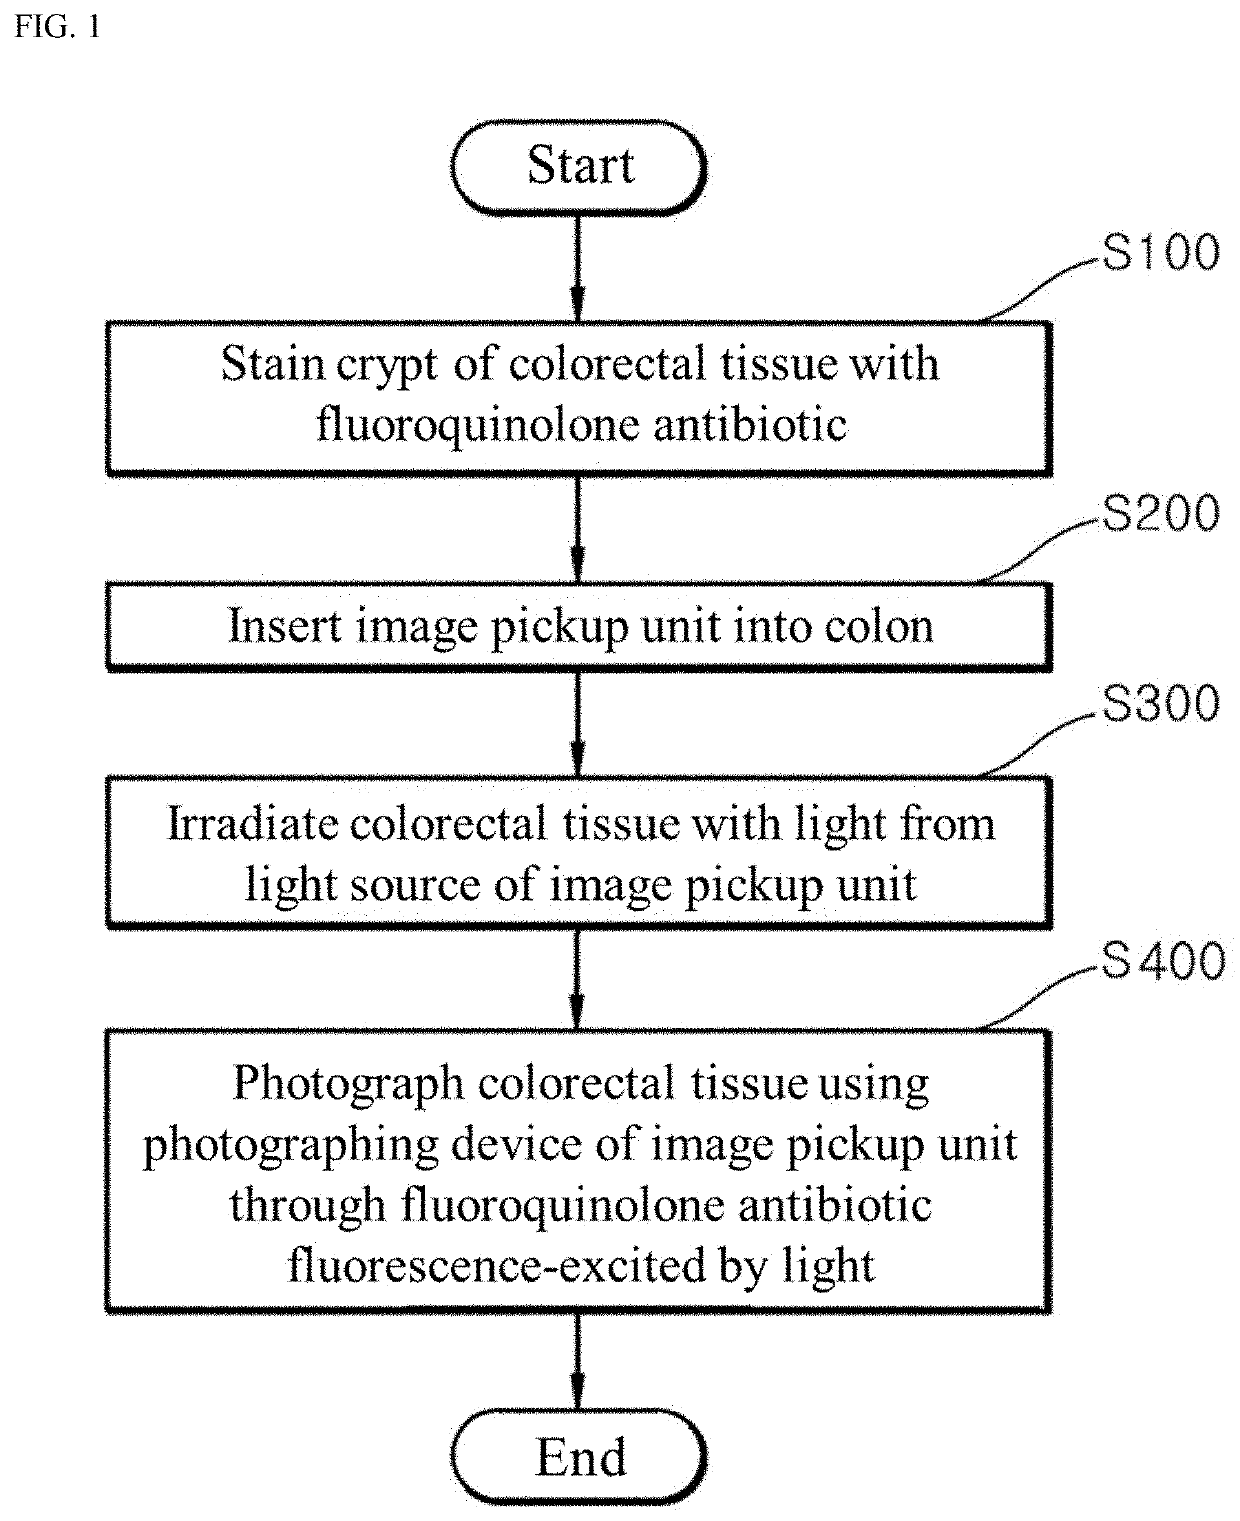 Fluorescence endoscopic method for visualization of colorectal tissue using fluoroquinolone antibiotics and method for diagnosis of lesions of colorectal tissue using the same